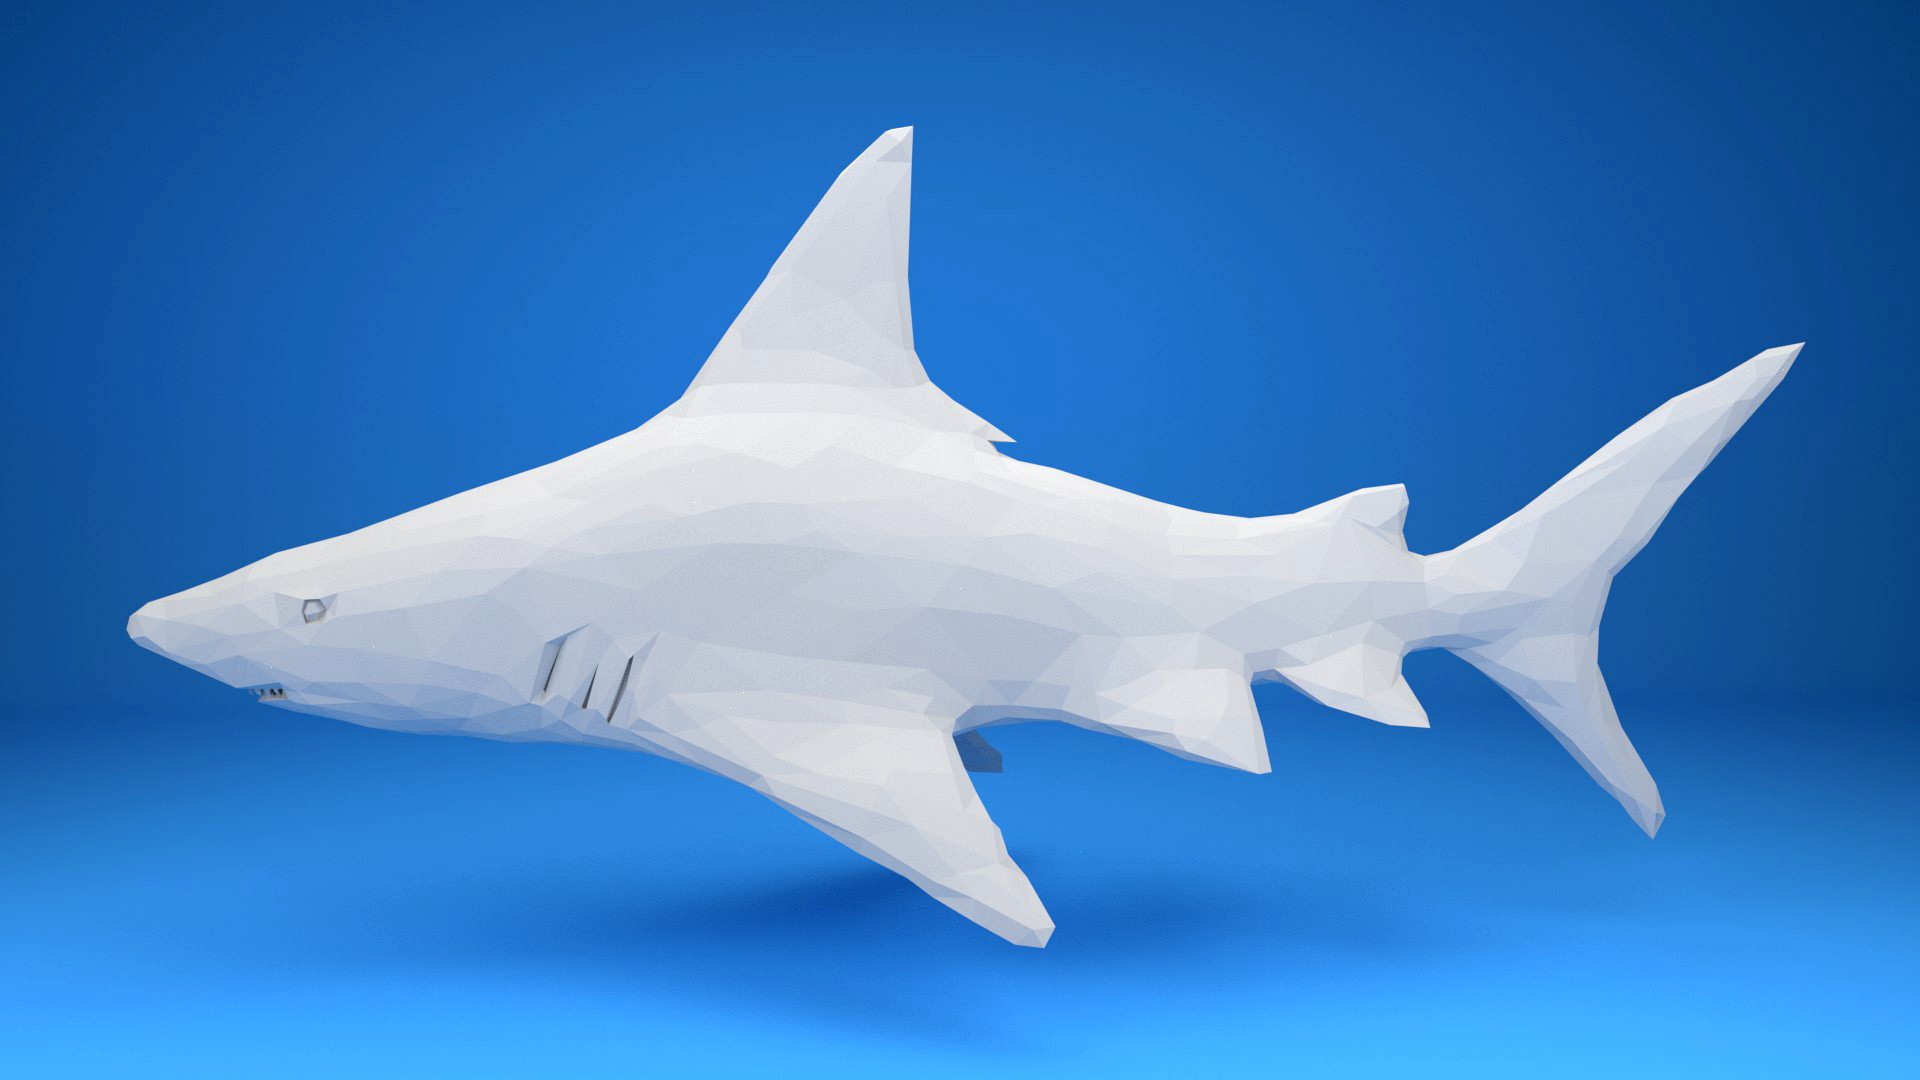 Shark Low poly model for3D print or animation paper style